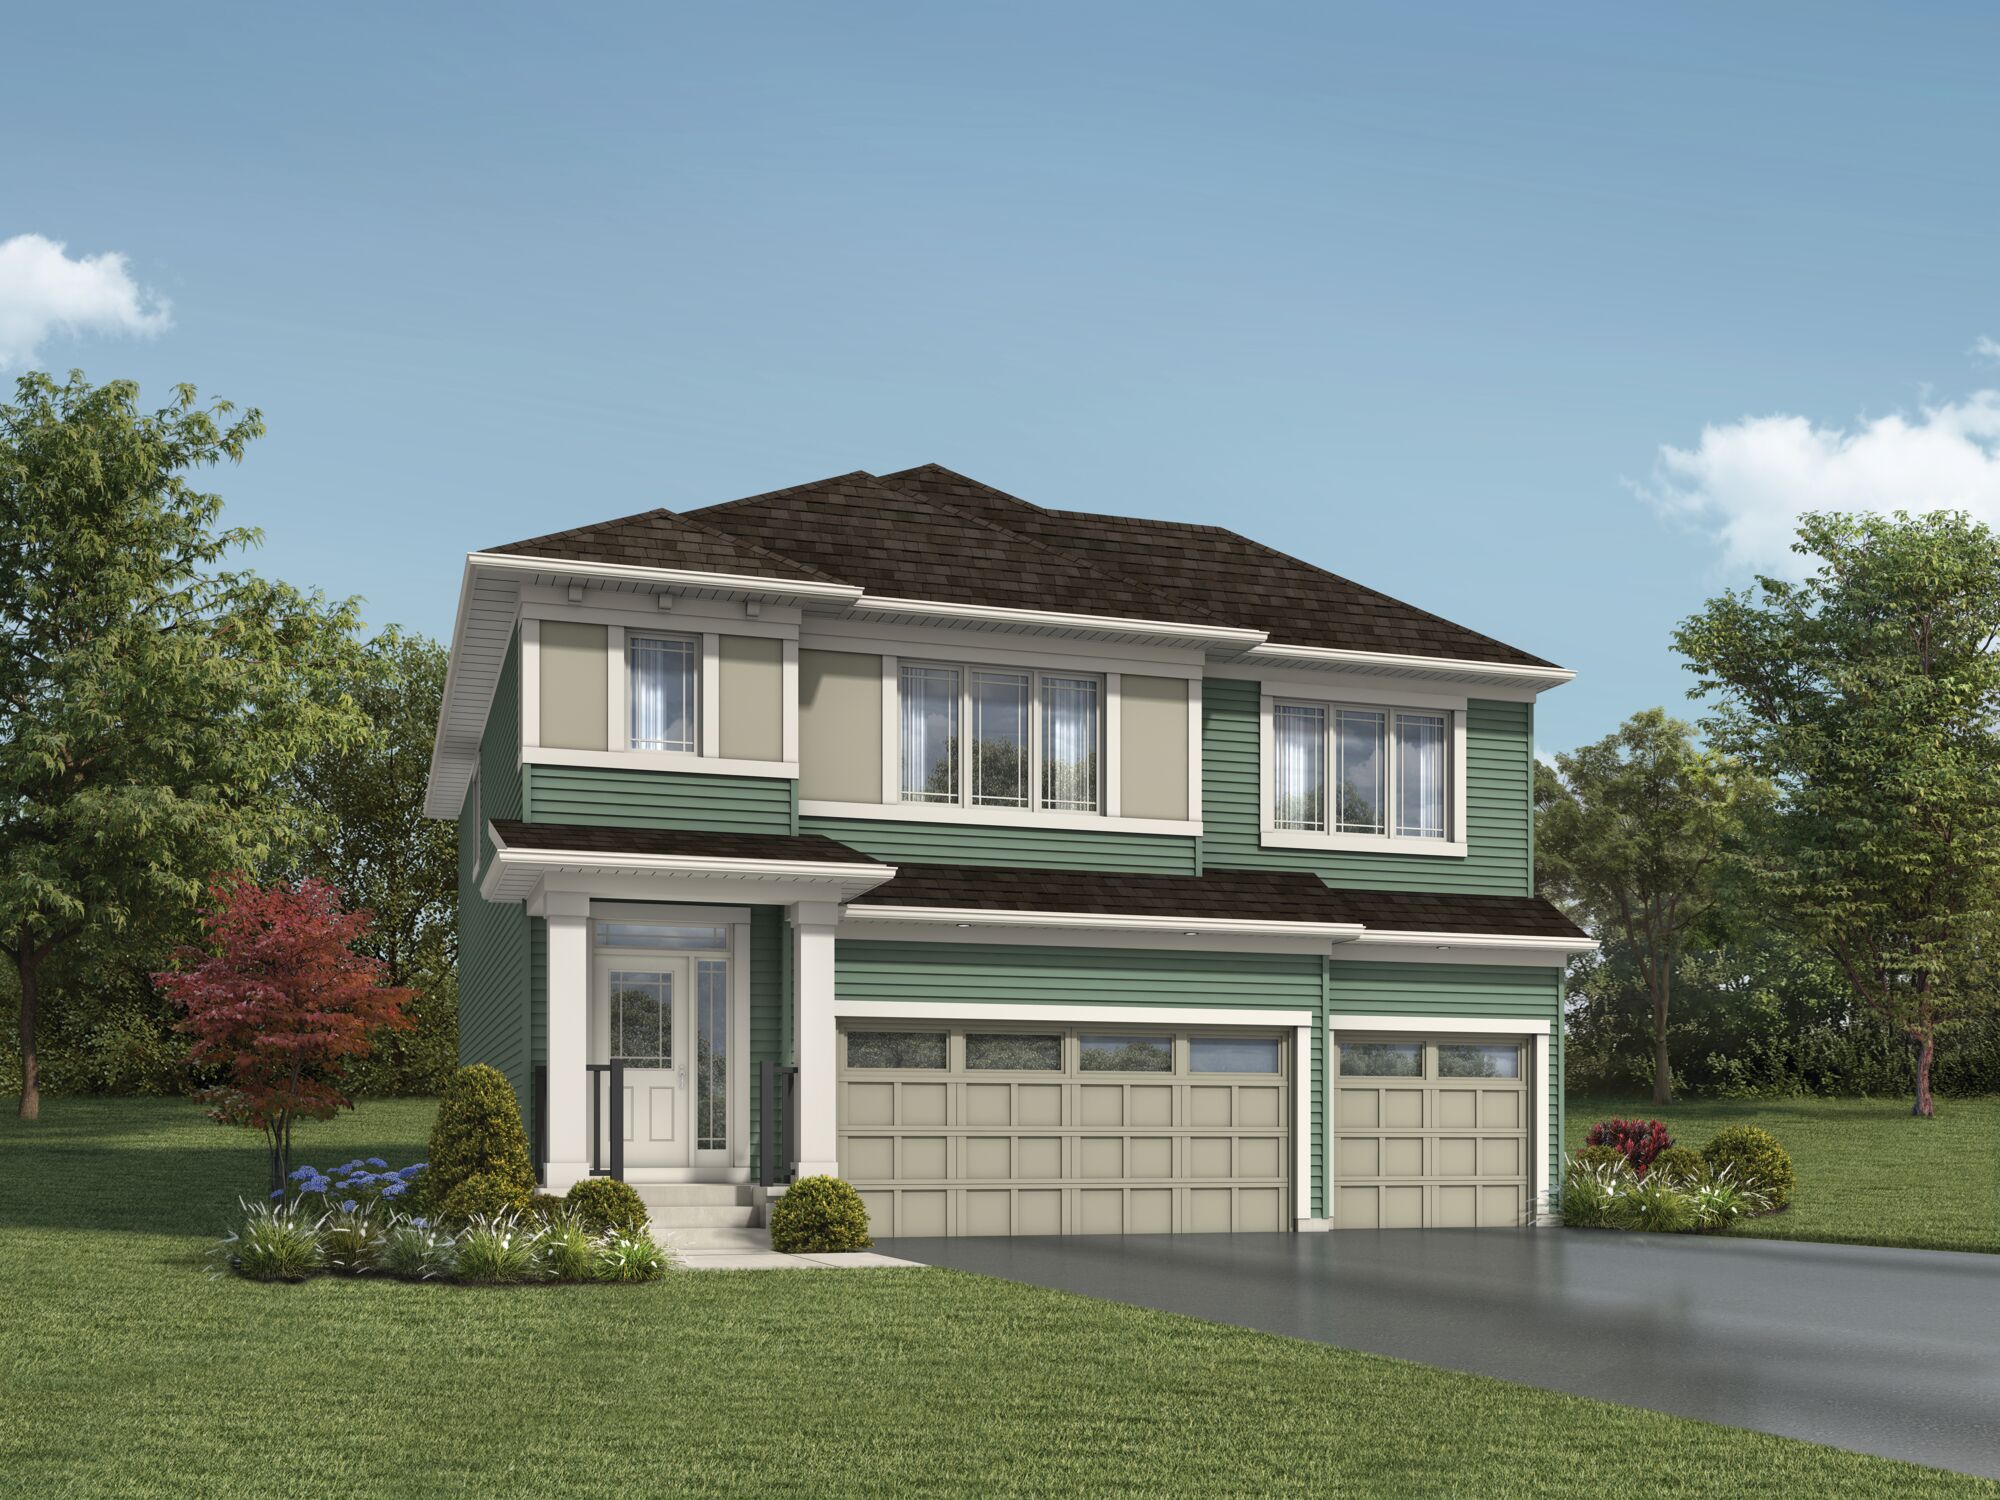 Rundle Prairie Elevation, featuring one medium sized windows and 2 large window across the front of the home on the second floor. Three car garage at the front of the home with a walk way from the driveway up to the front porch of the home to the left.